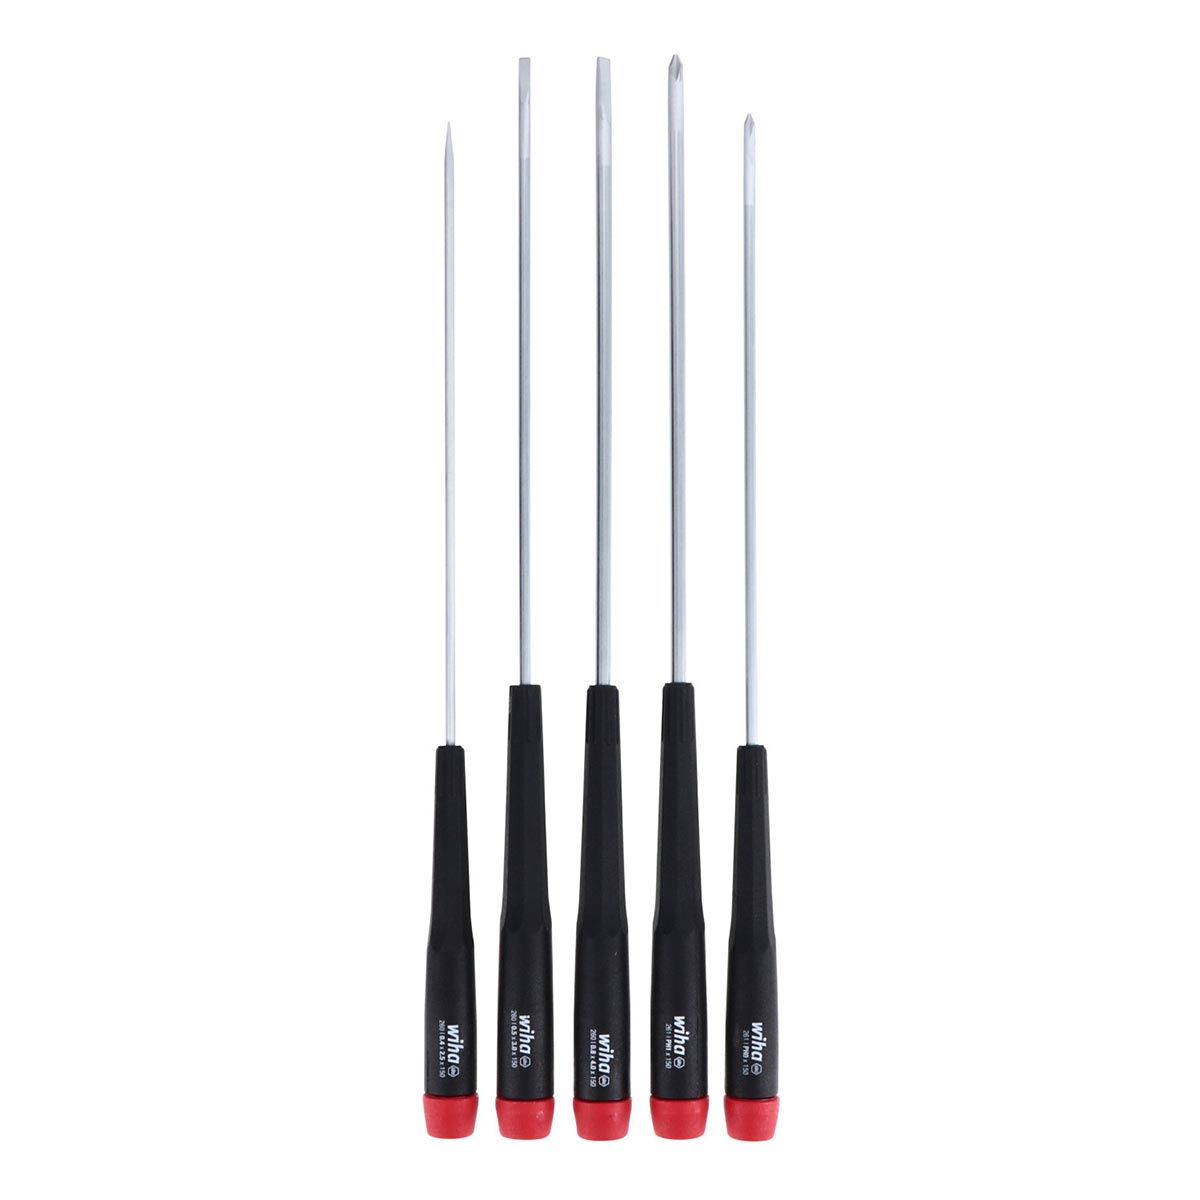 Wiha Precision Long Slotted/phillips Screwdrivers (5 Piece Set)